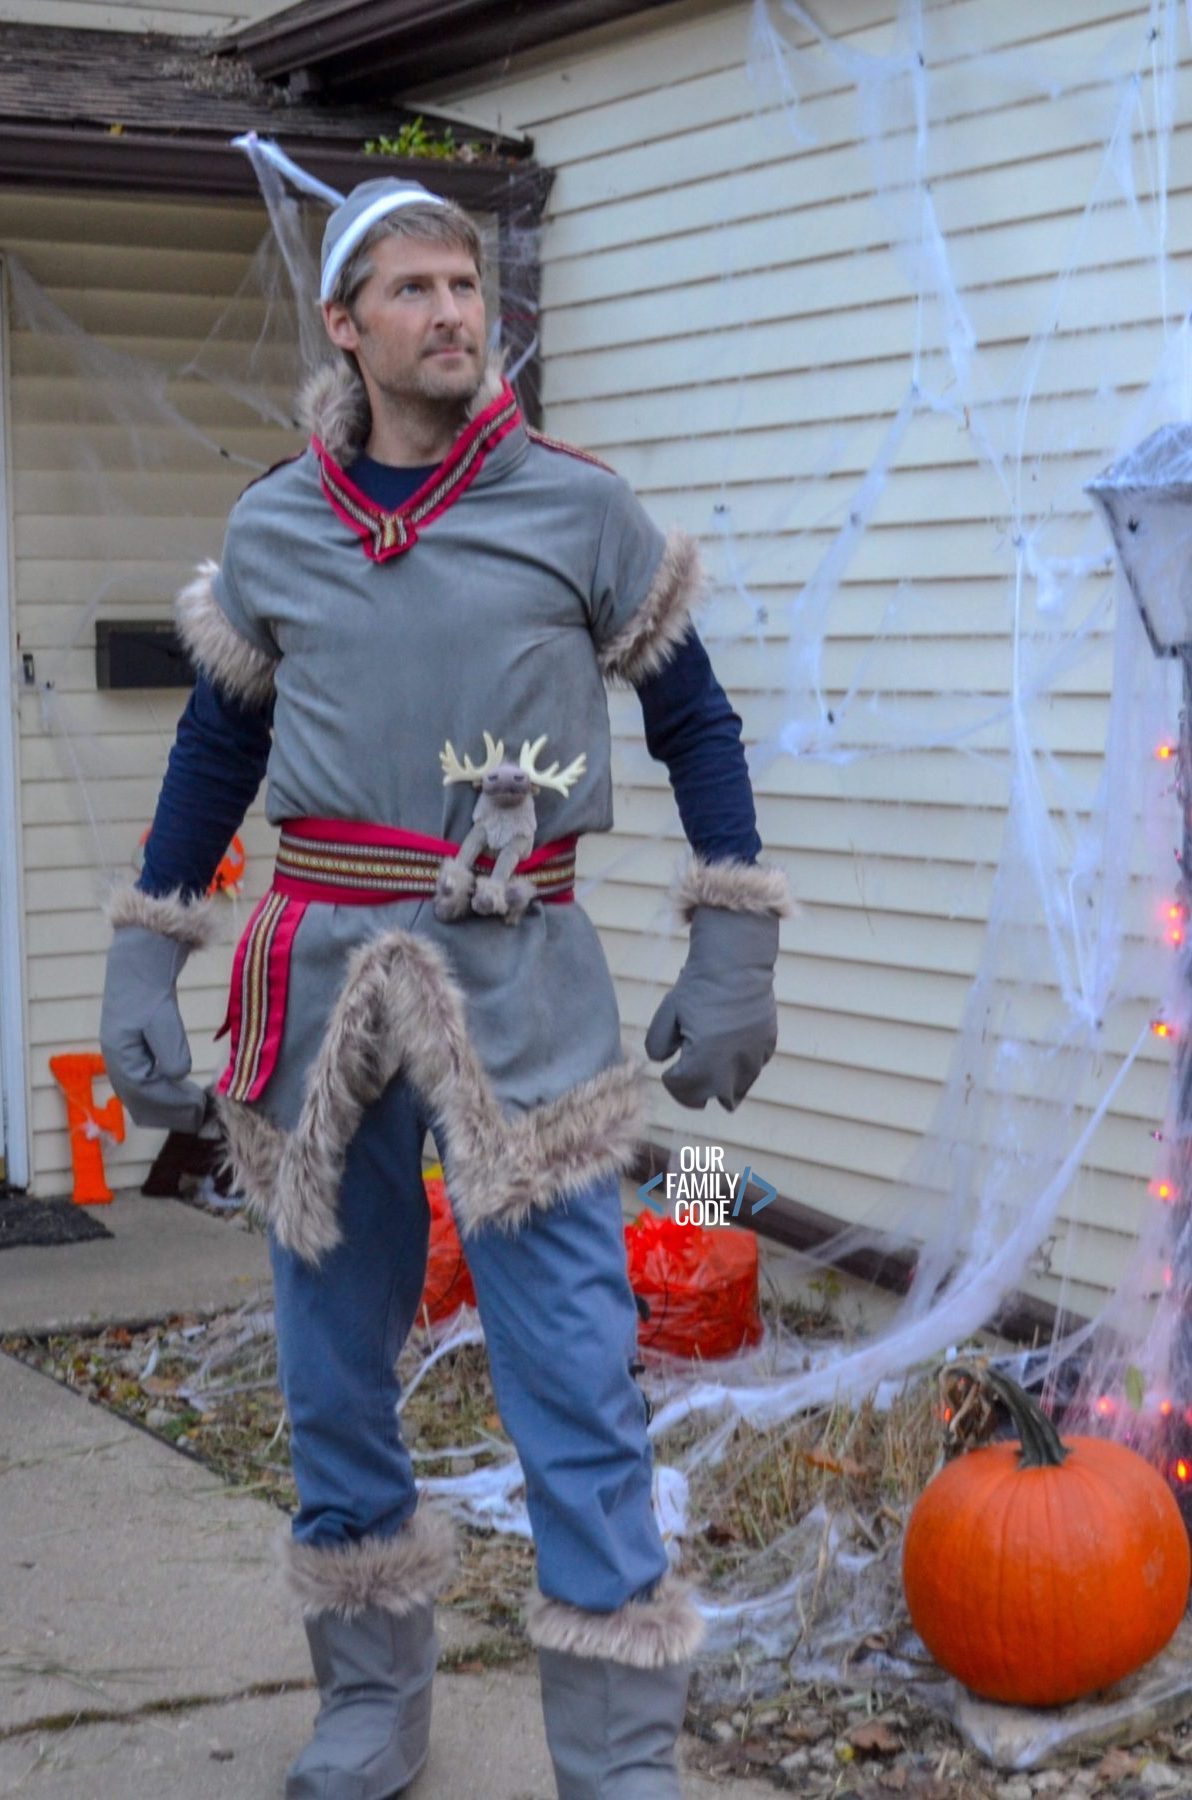 How to Make Frozen Family Halloween Costumes - Our Family Code